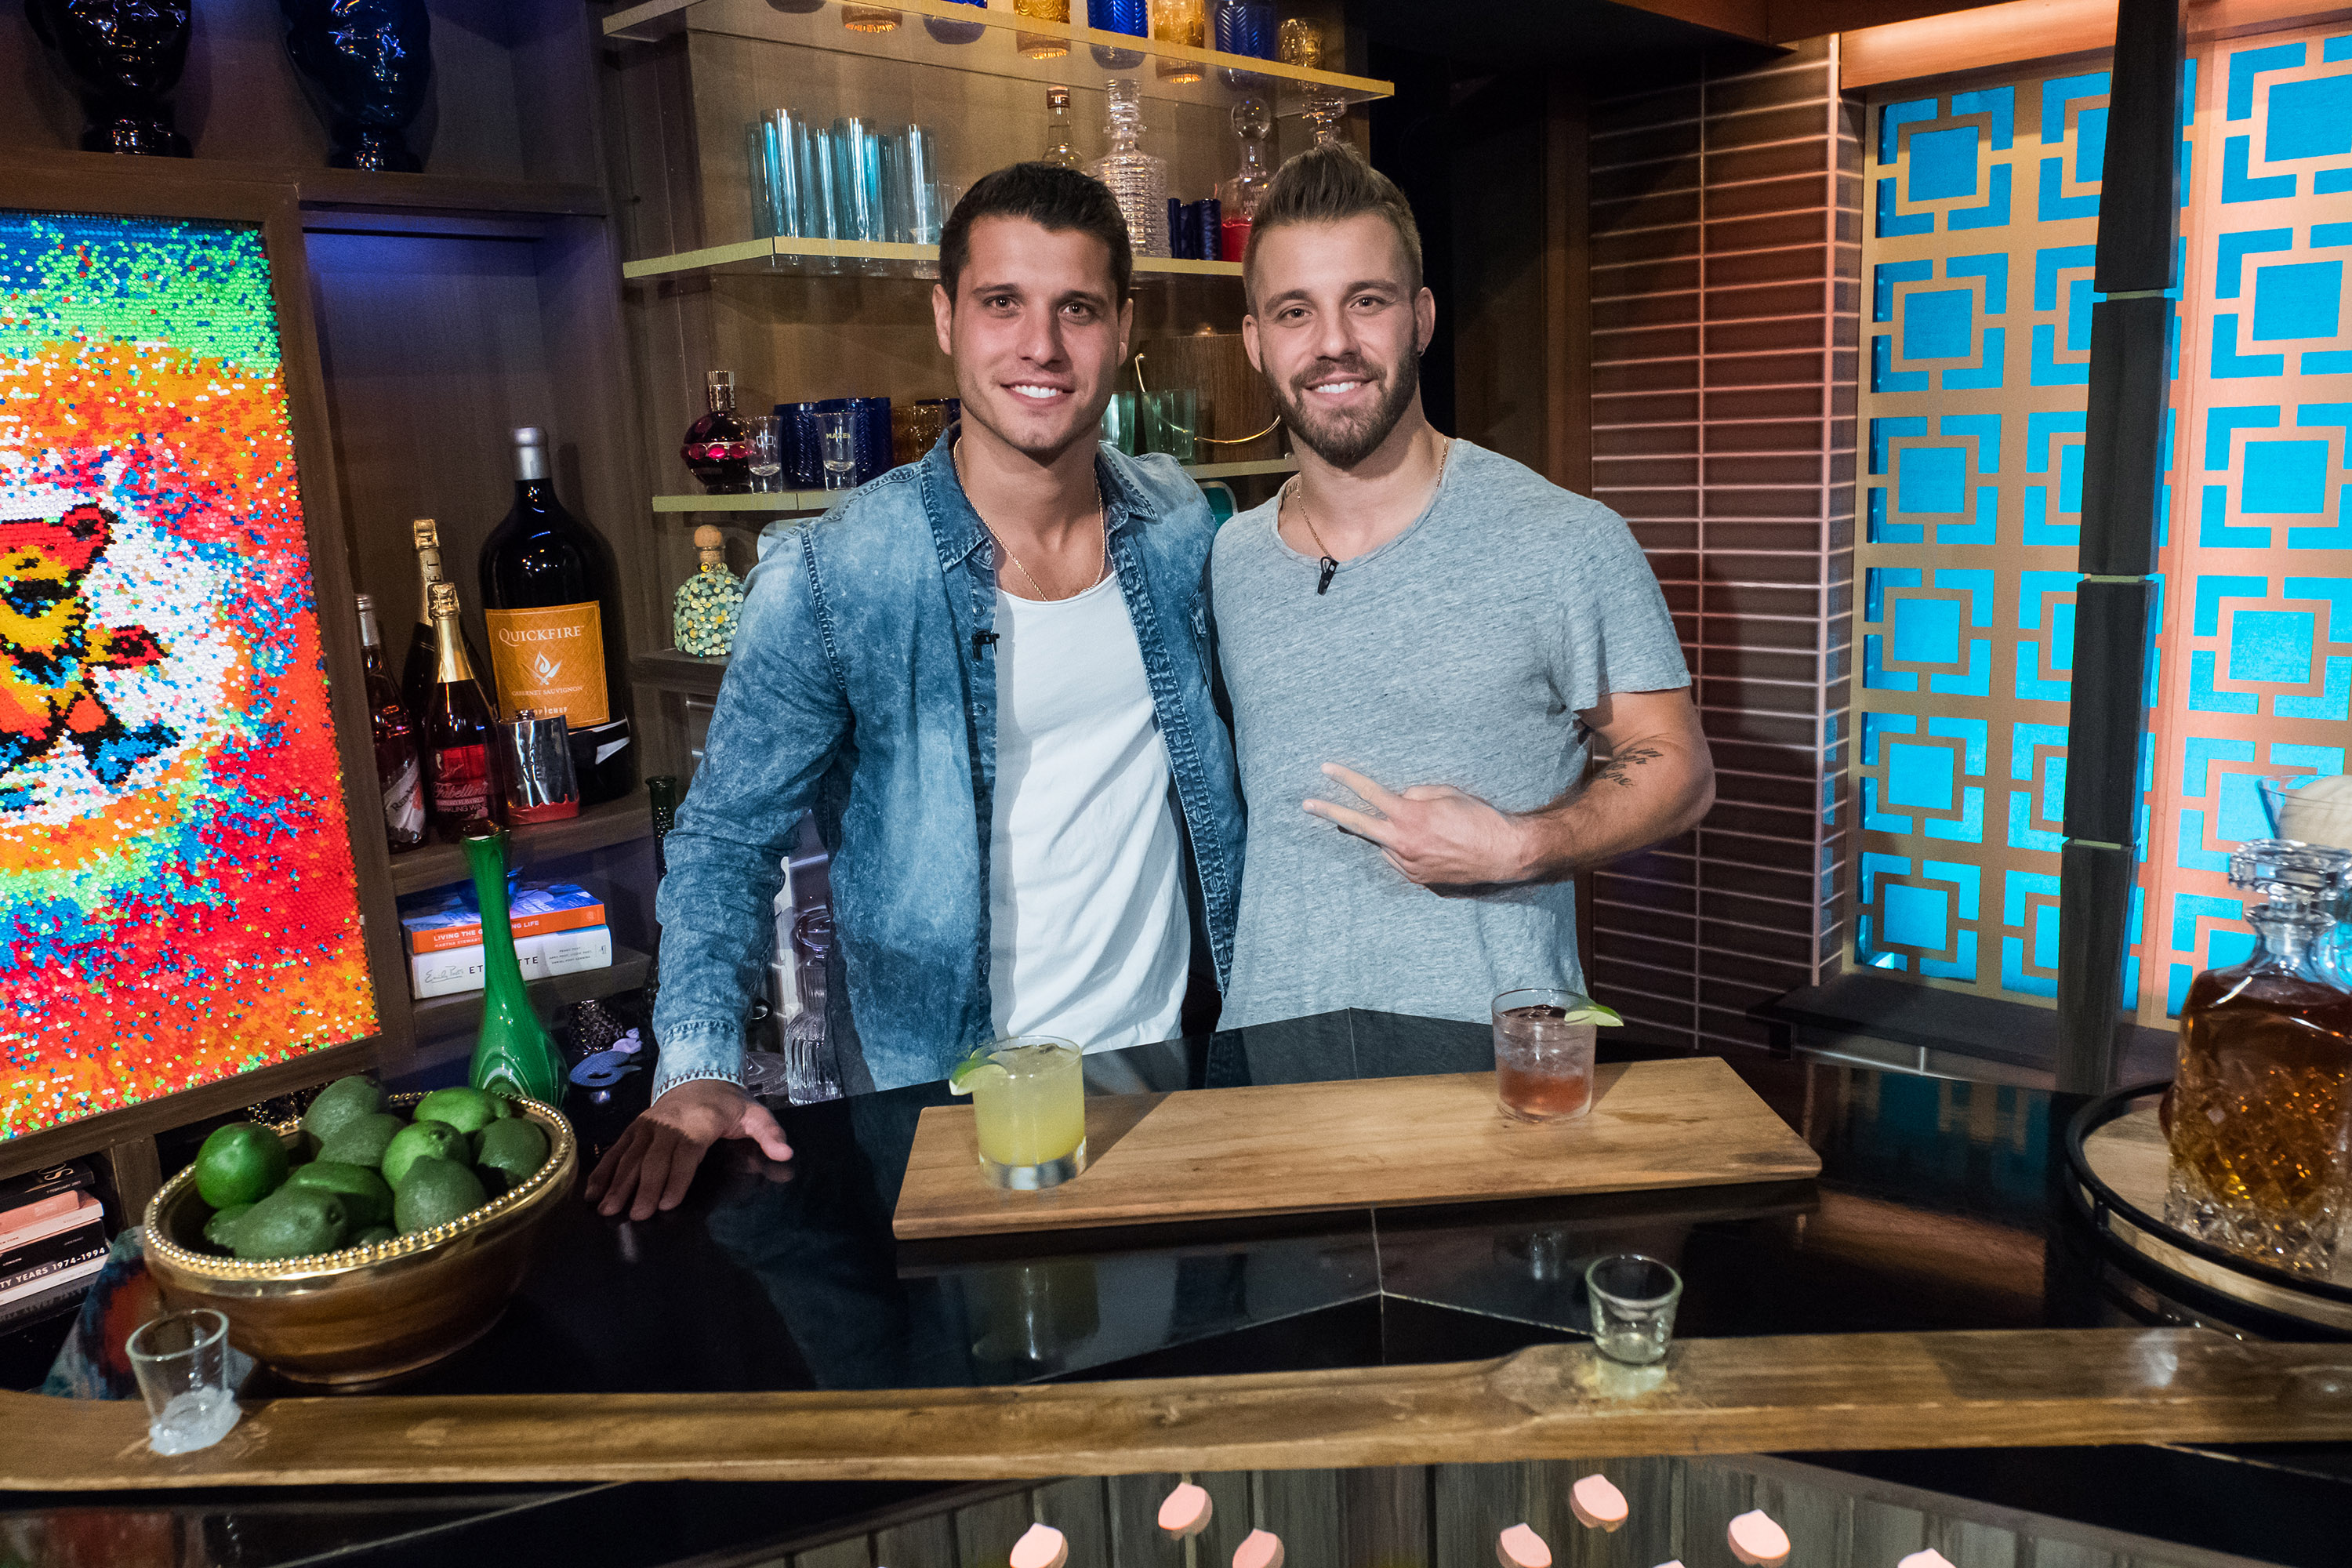 'Watch What Happens Live with Andy Cohen' -- Pictured (l-r): Cody Calafiore and Paulie Calafiore